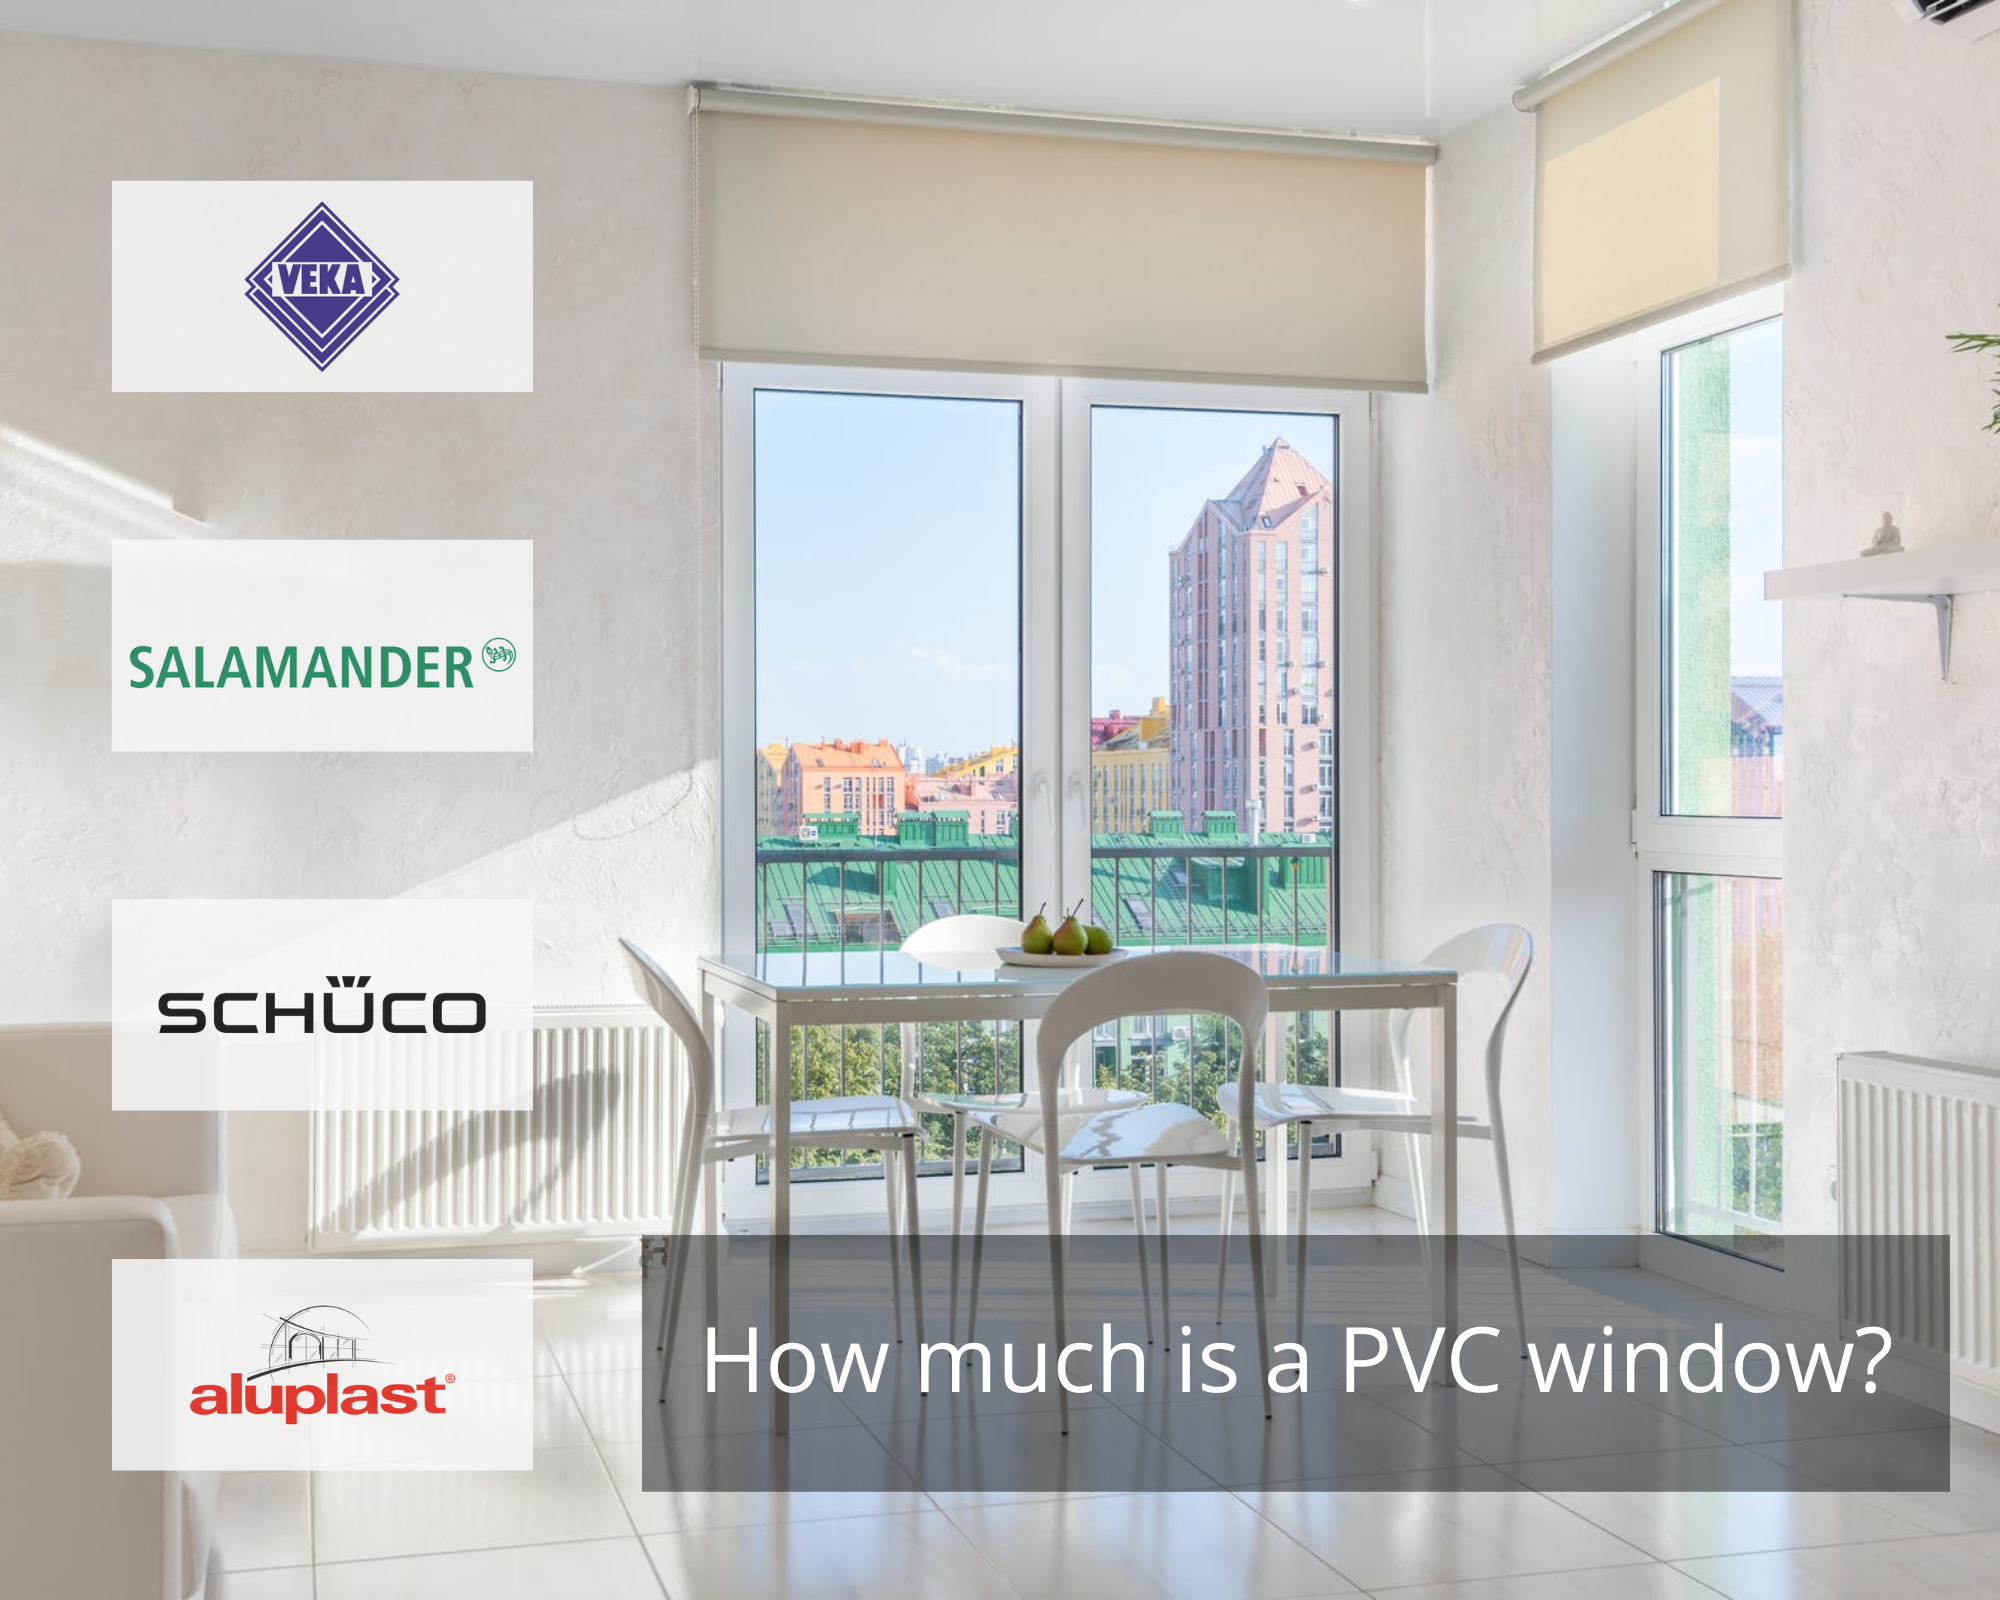 How much is a PVC window?